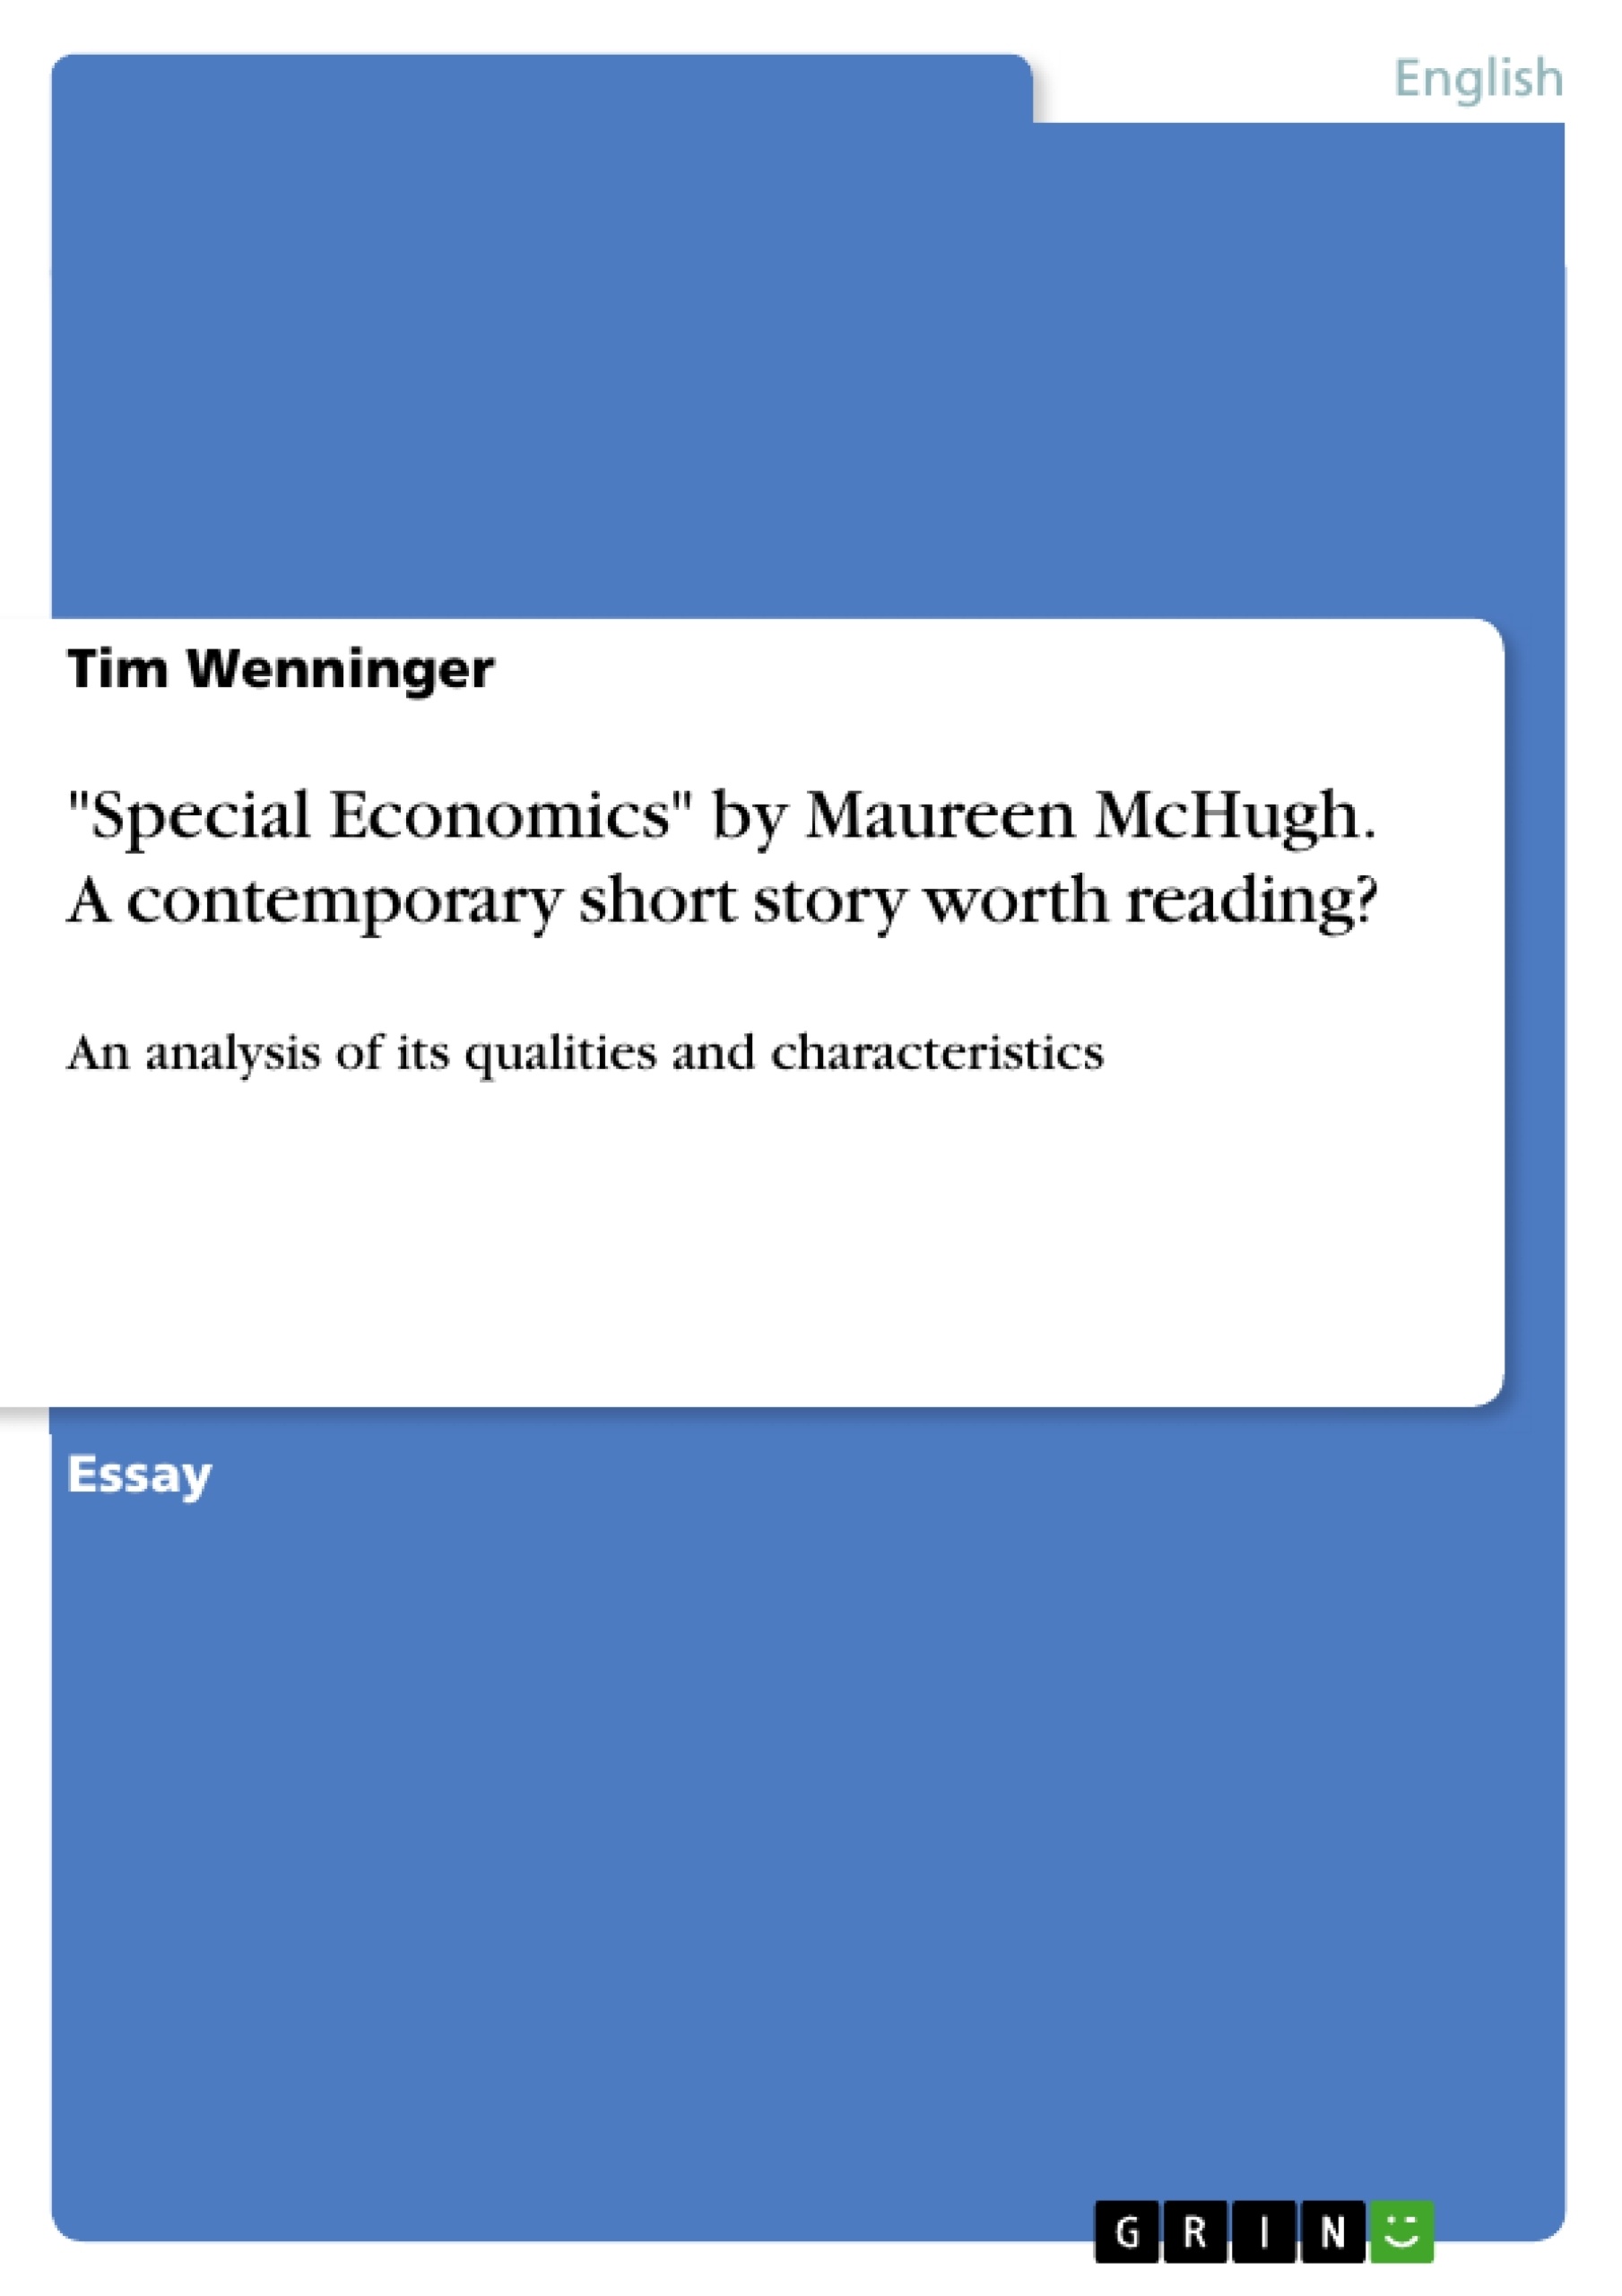 Title: "Special Economics" by Maureen McHugh. A contemporary short story worth reading?